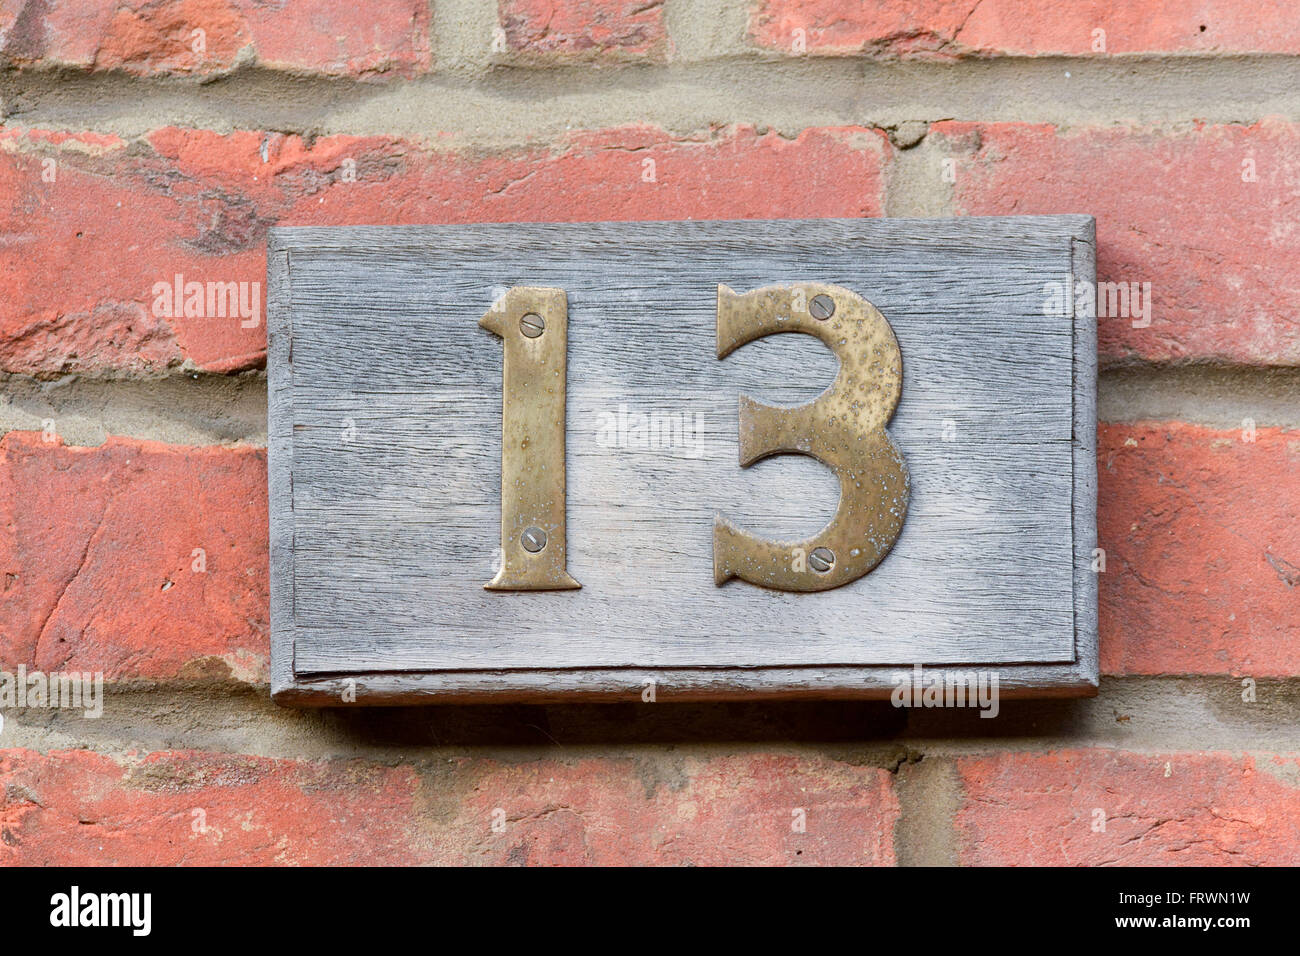 House number 13 sign with brass numbers on wooden plinth Stock Photo